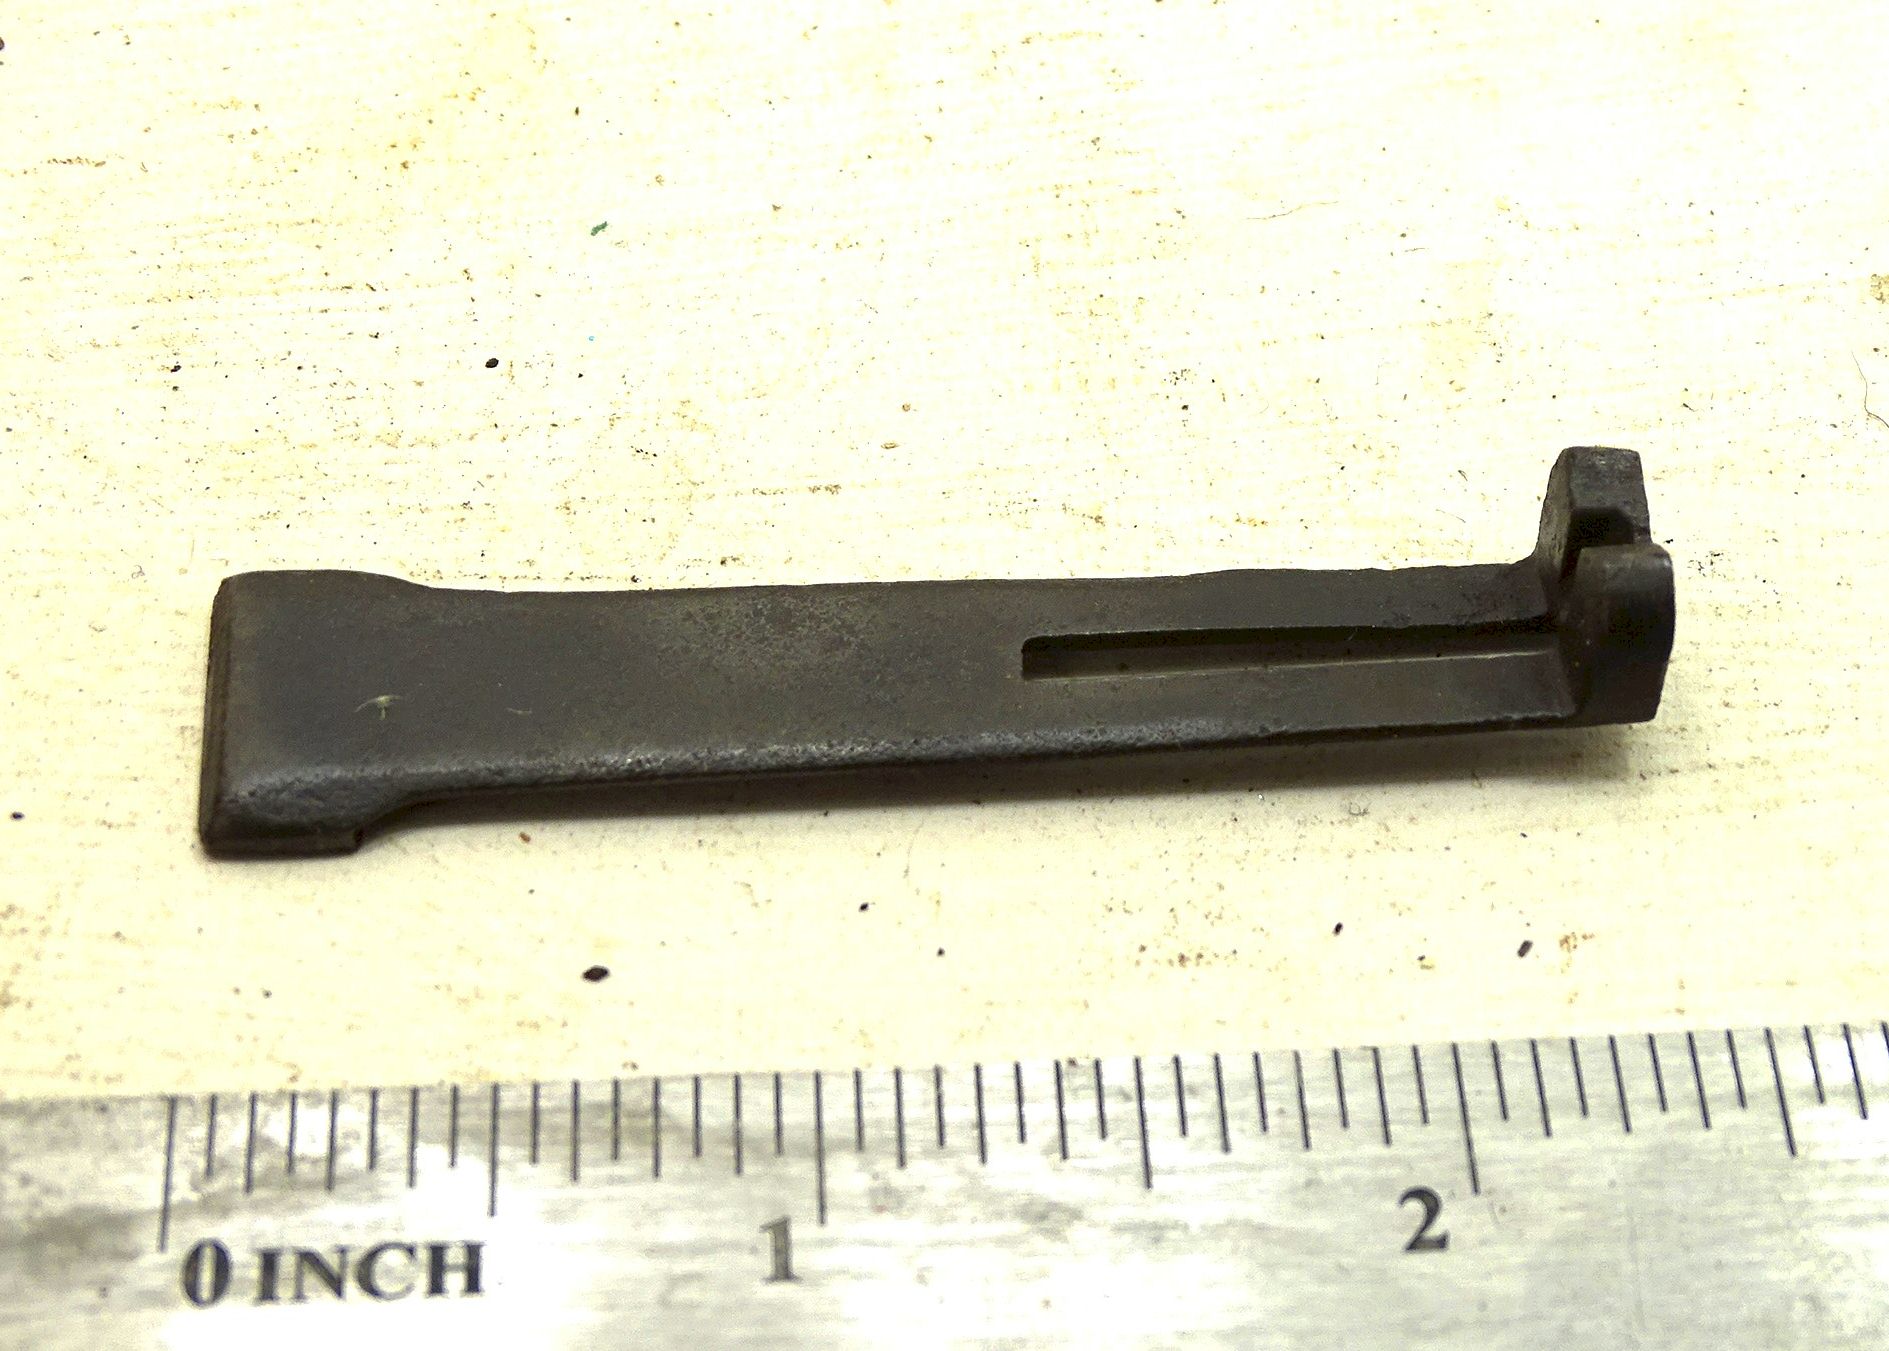 Sight - Rear for a Remington No. 2 Rolling block rifle